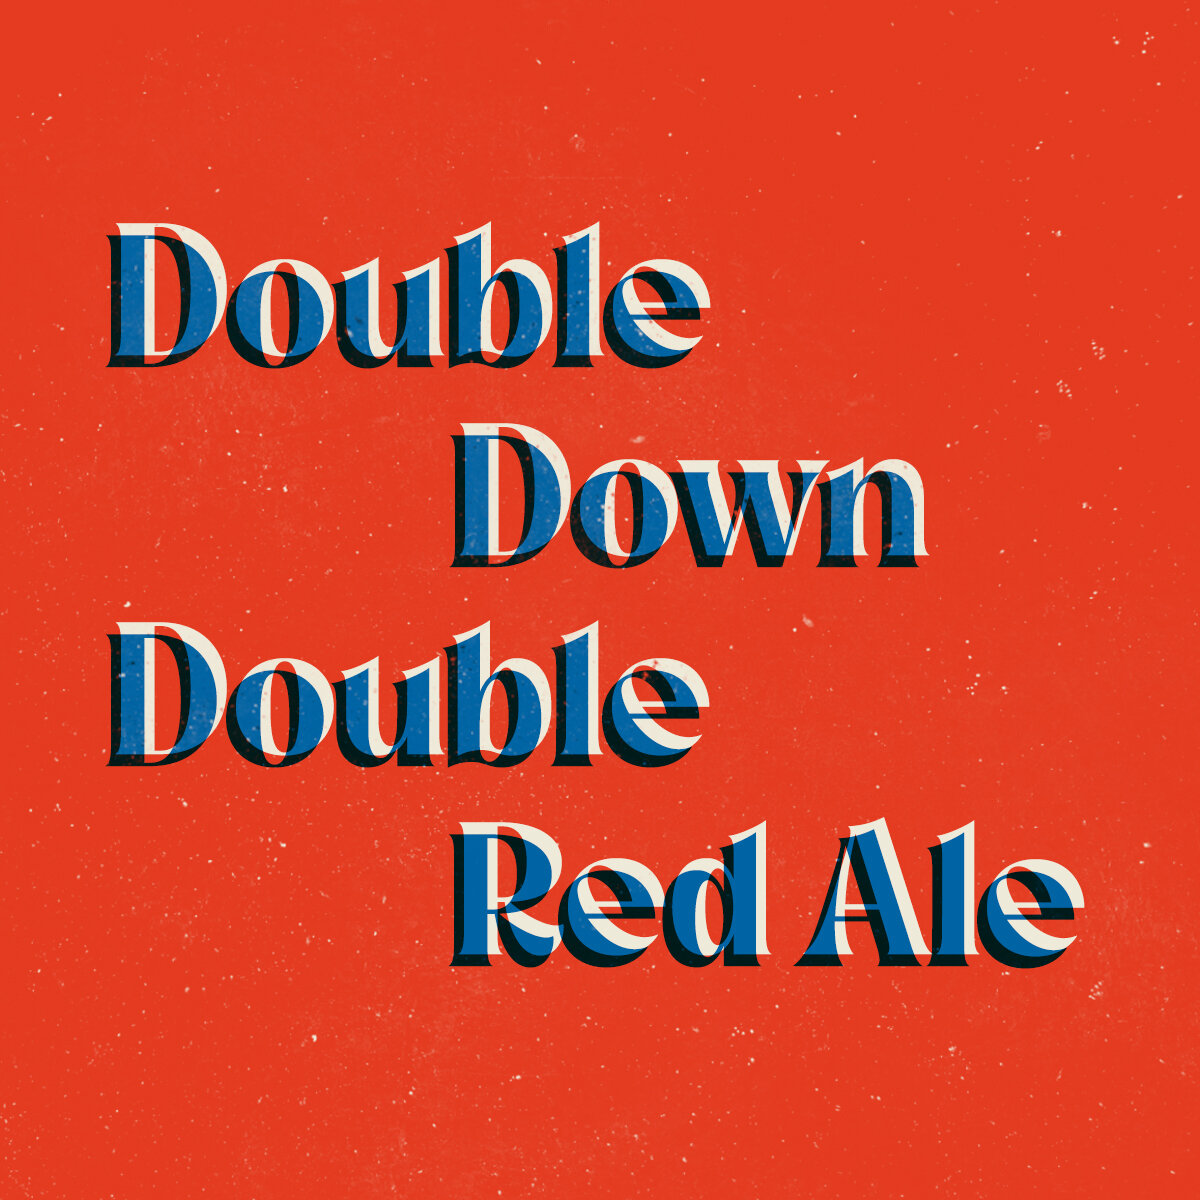 Double Down Double Red Ale